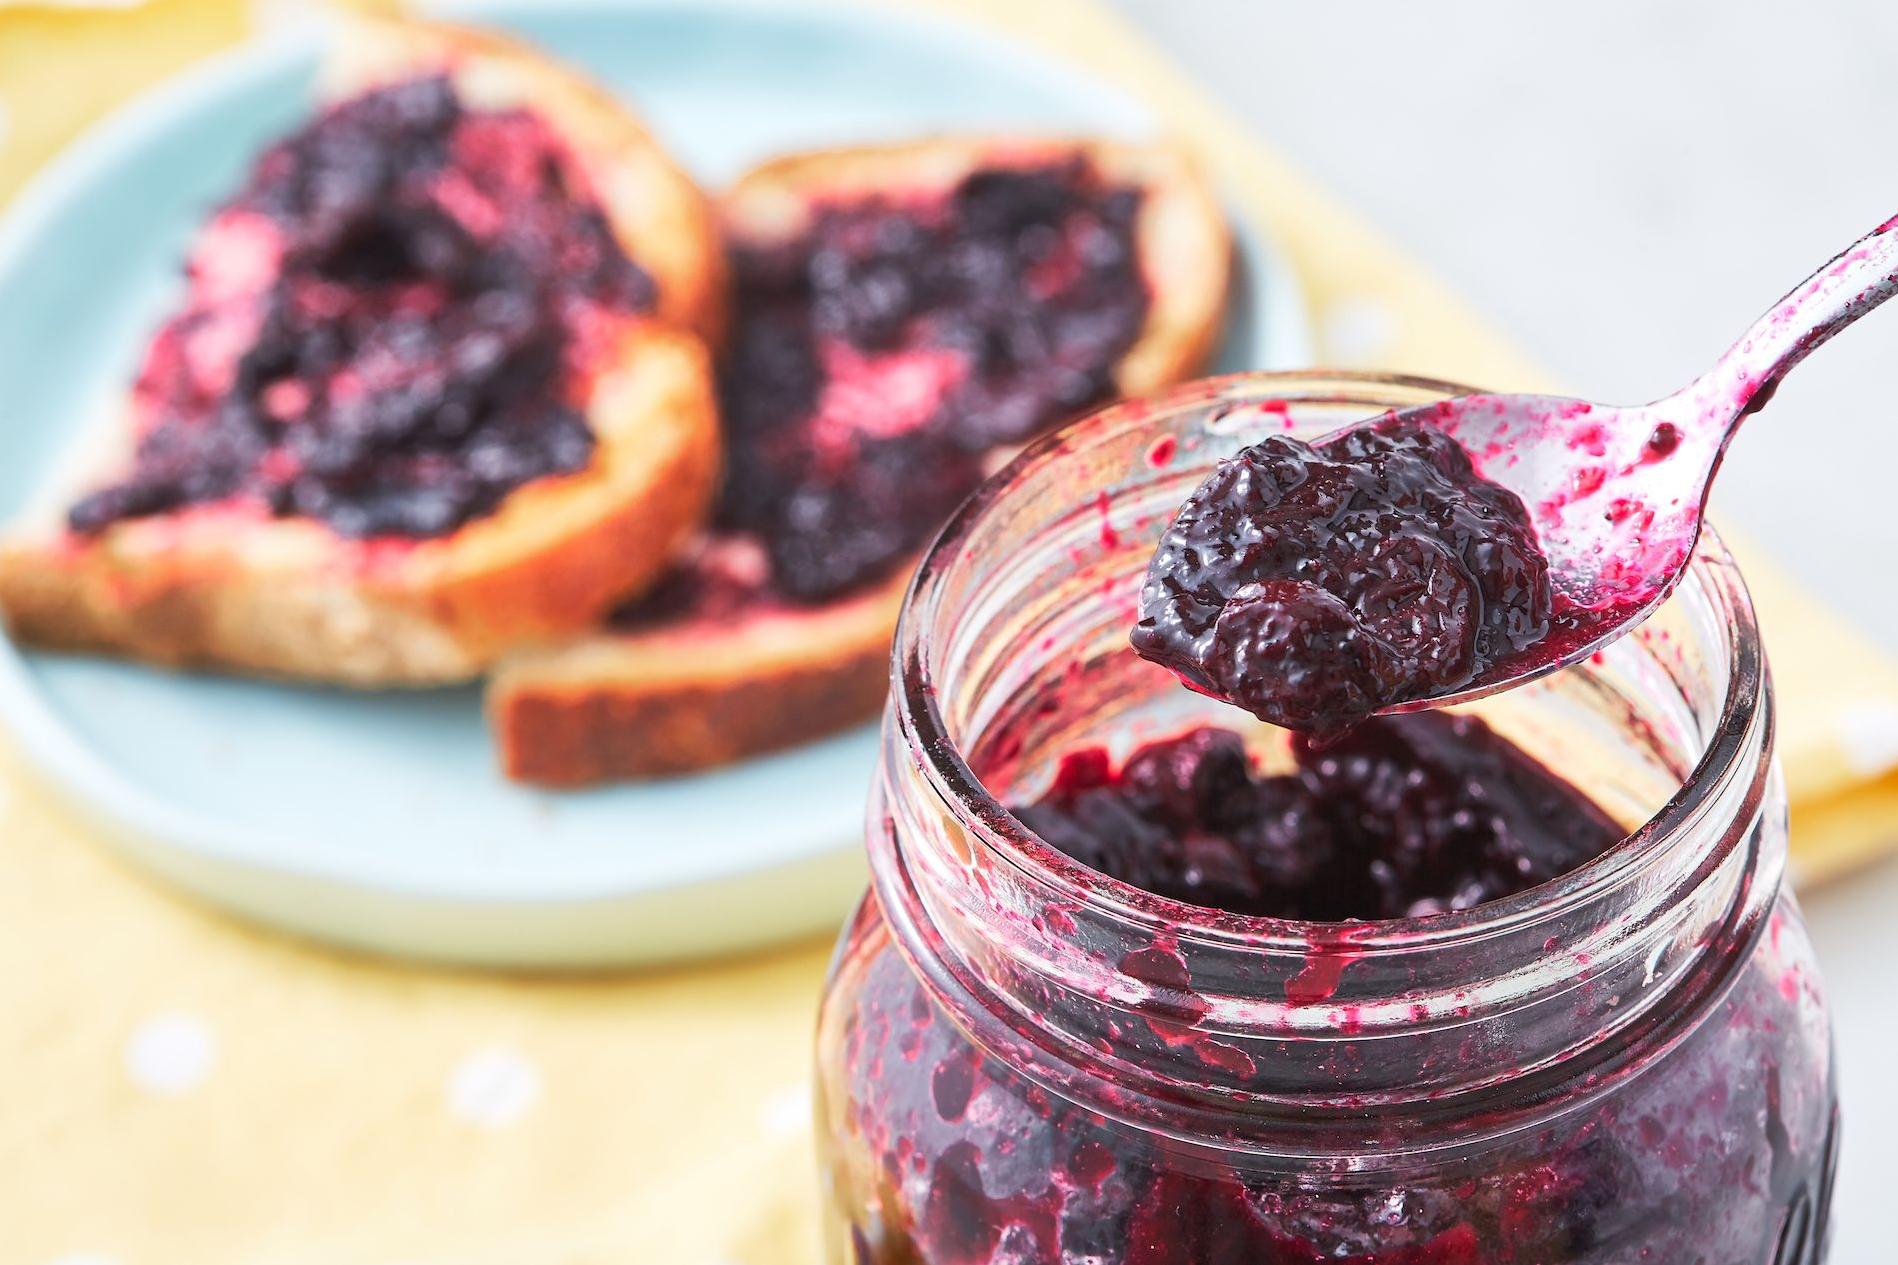  Drizzle some blueberry wine jam over your favorite ice cream for a fruity dessert.